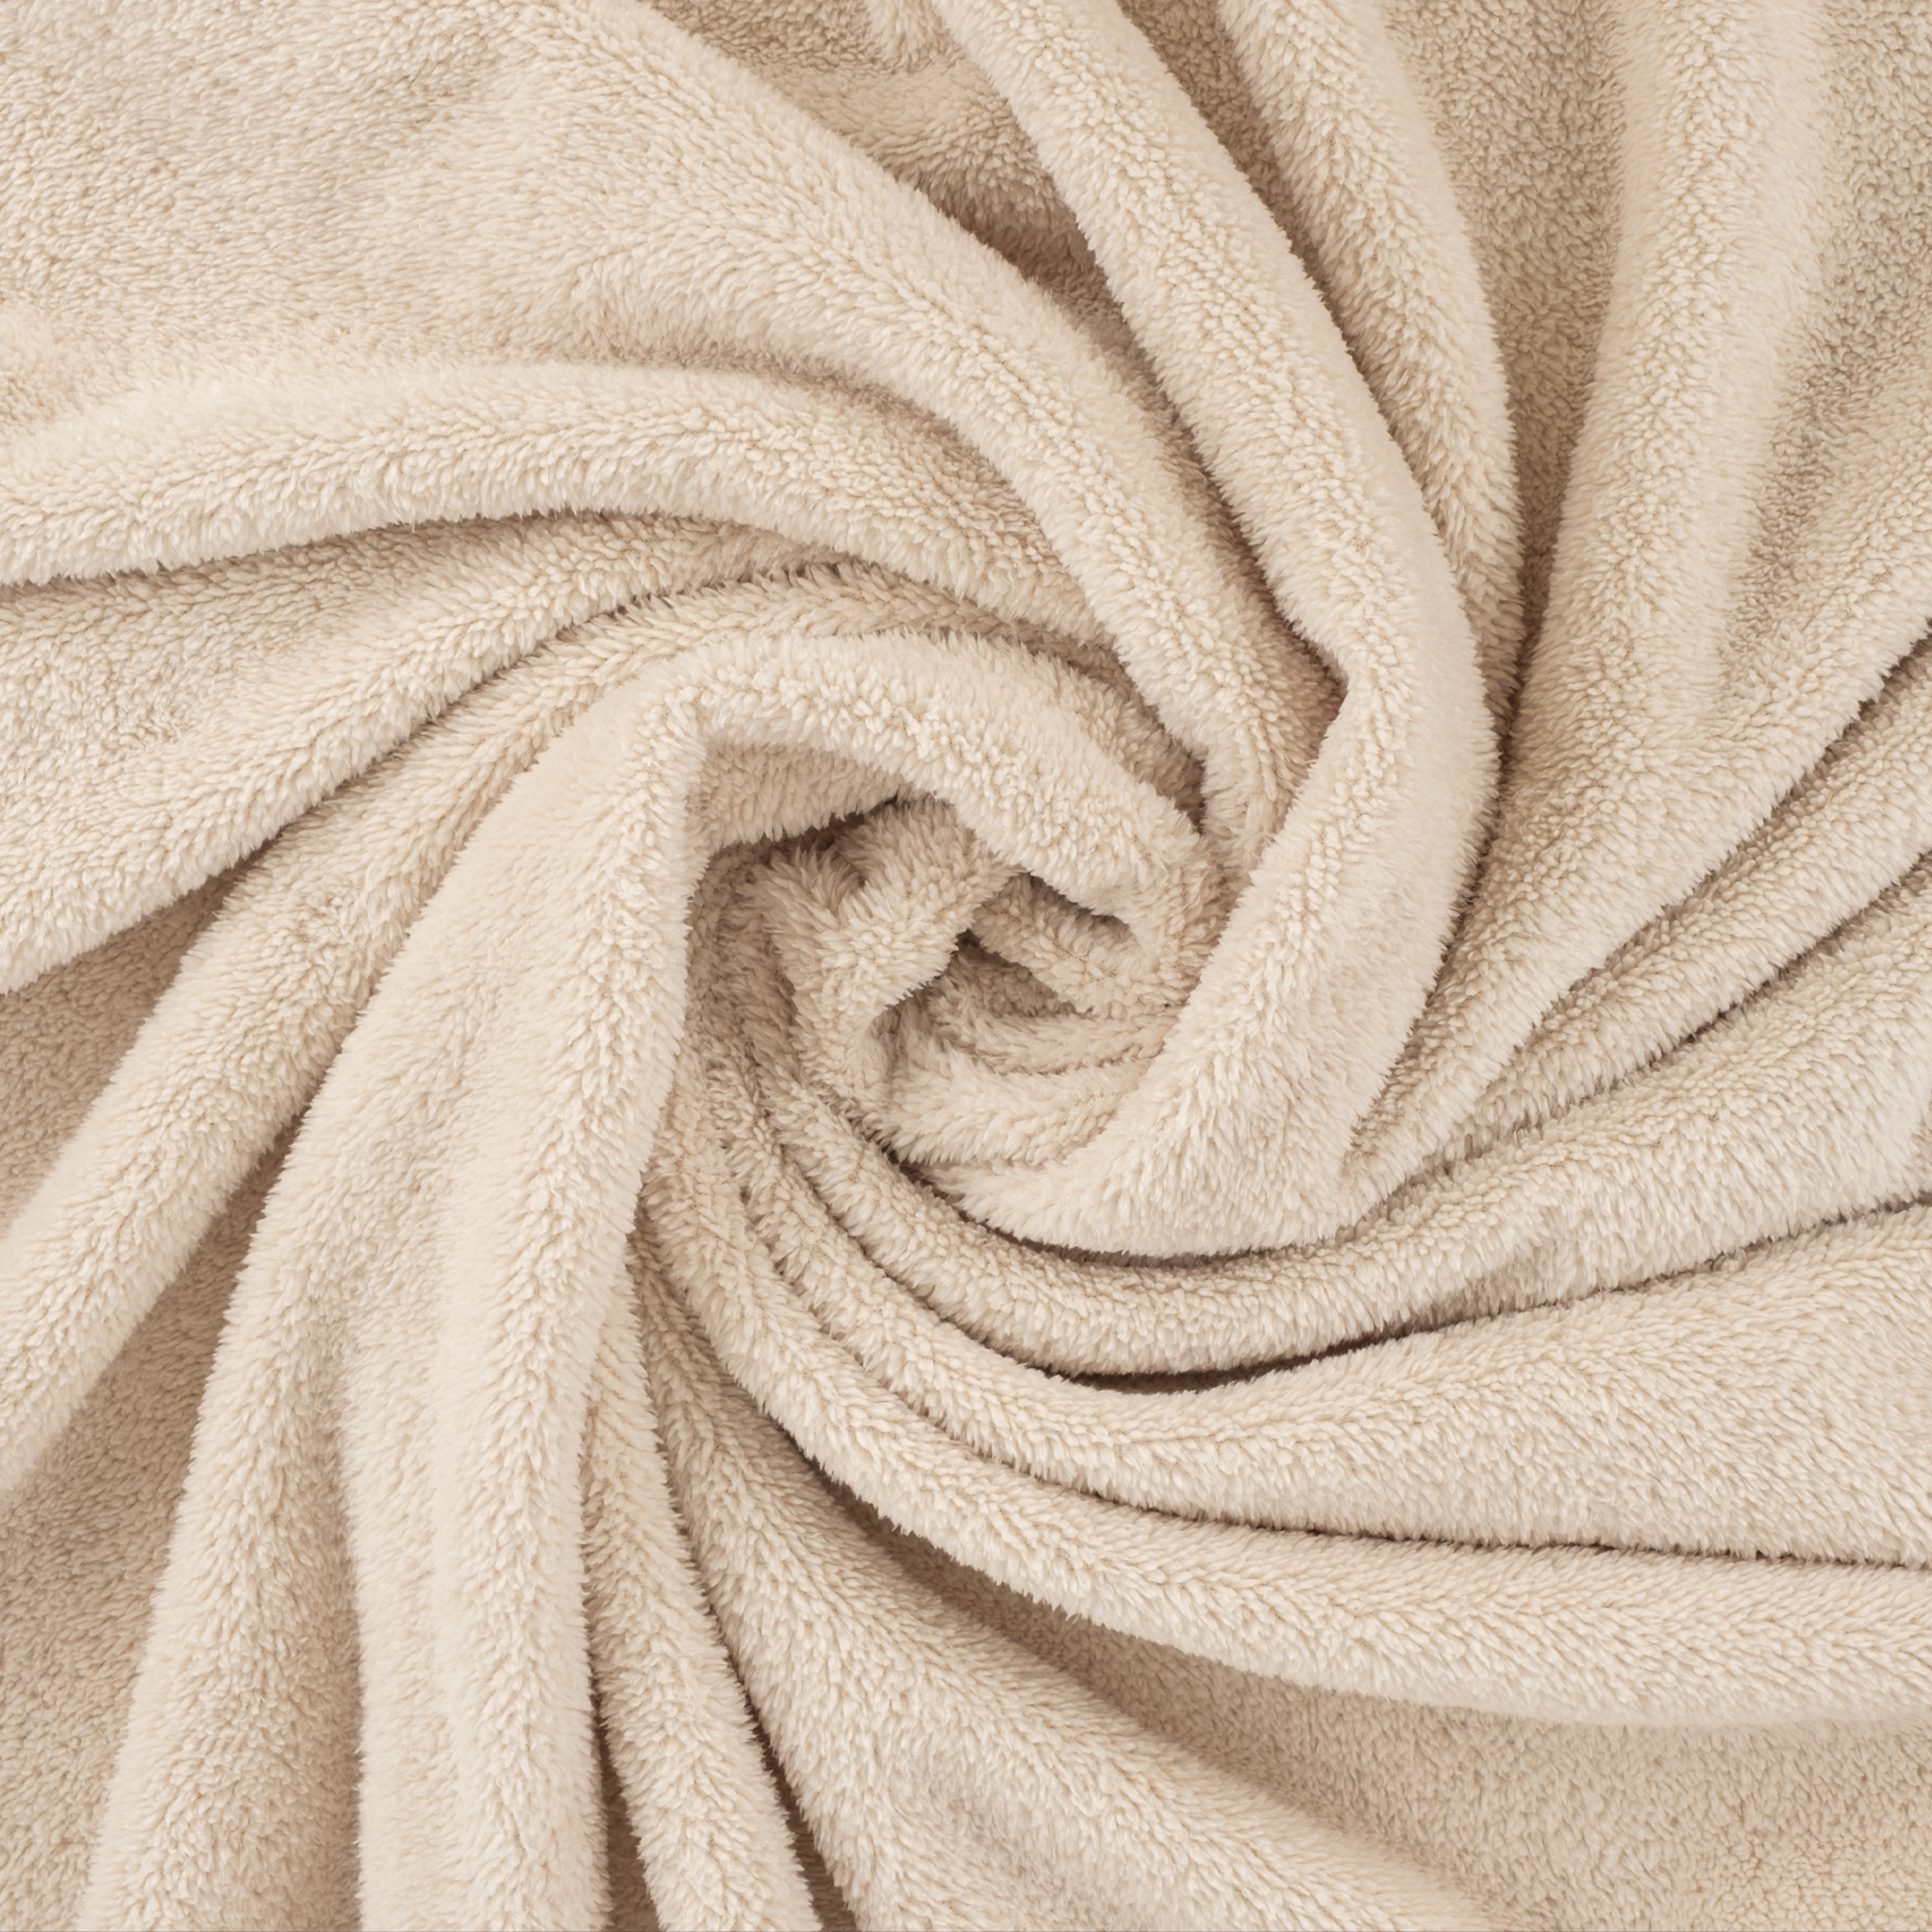 American Soft Linen - Bedding Fleece Blanket - Wholesale - 15 Set Case Pack - Twin Size 60x80 inches - Sand-Taupe - 5